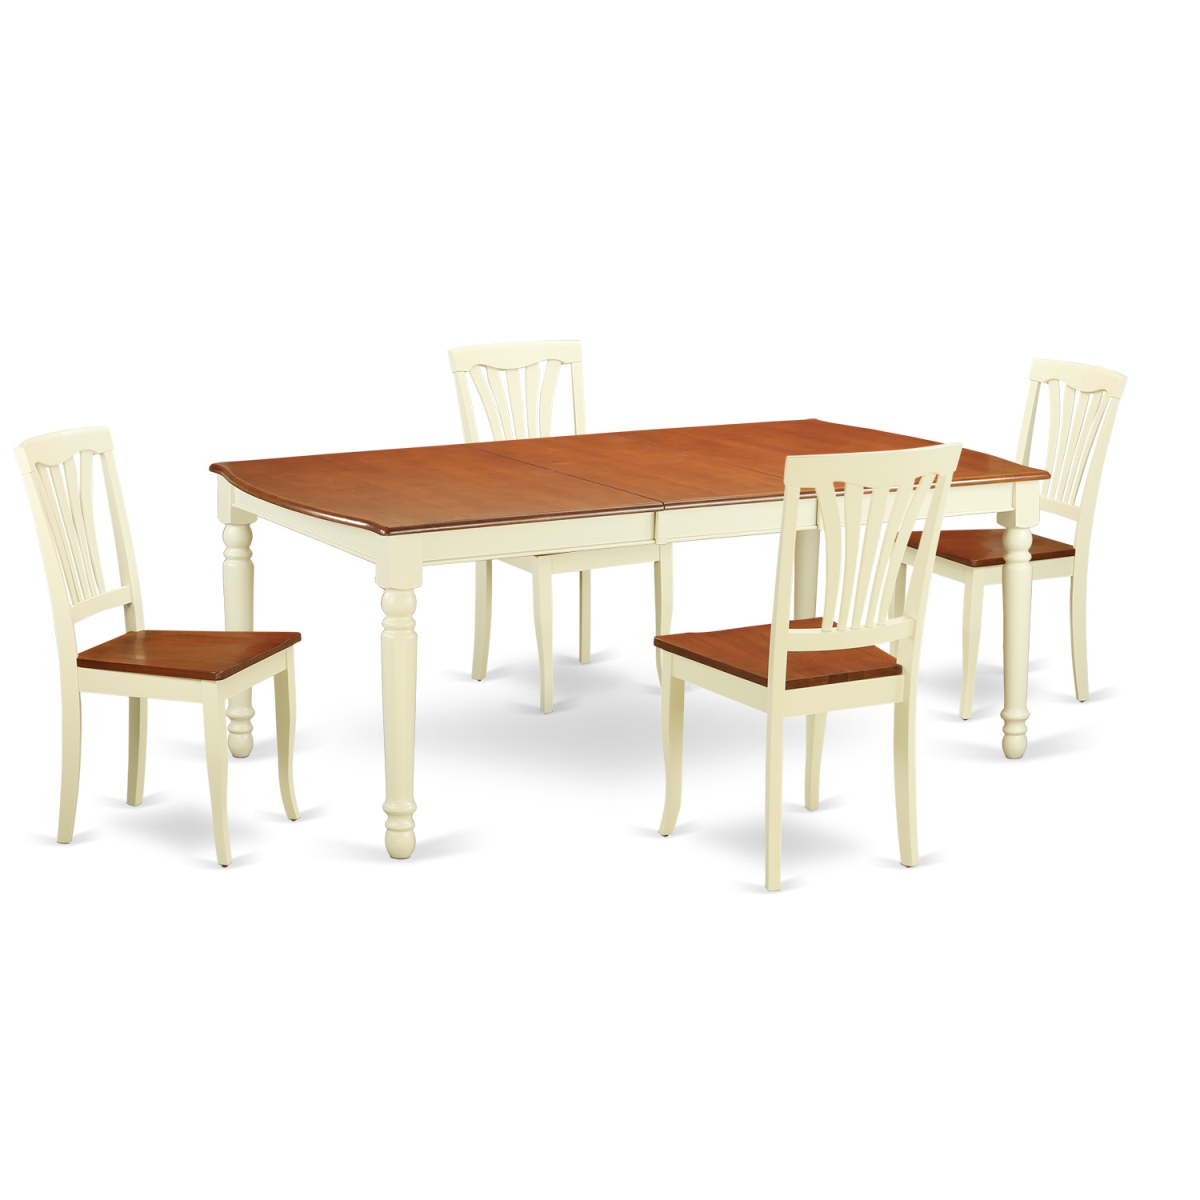 Picture of East West Furniture DOAV5-WHI-W Wood Seat Dinette Table Set - Kitchen Table & 4 Chairs, Buttermilk & Cherry - 5 Piece